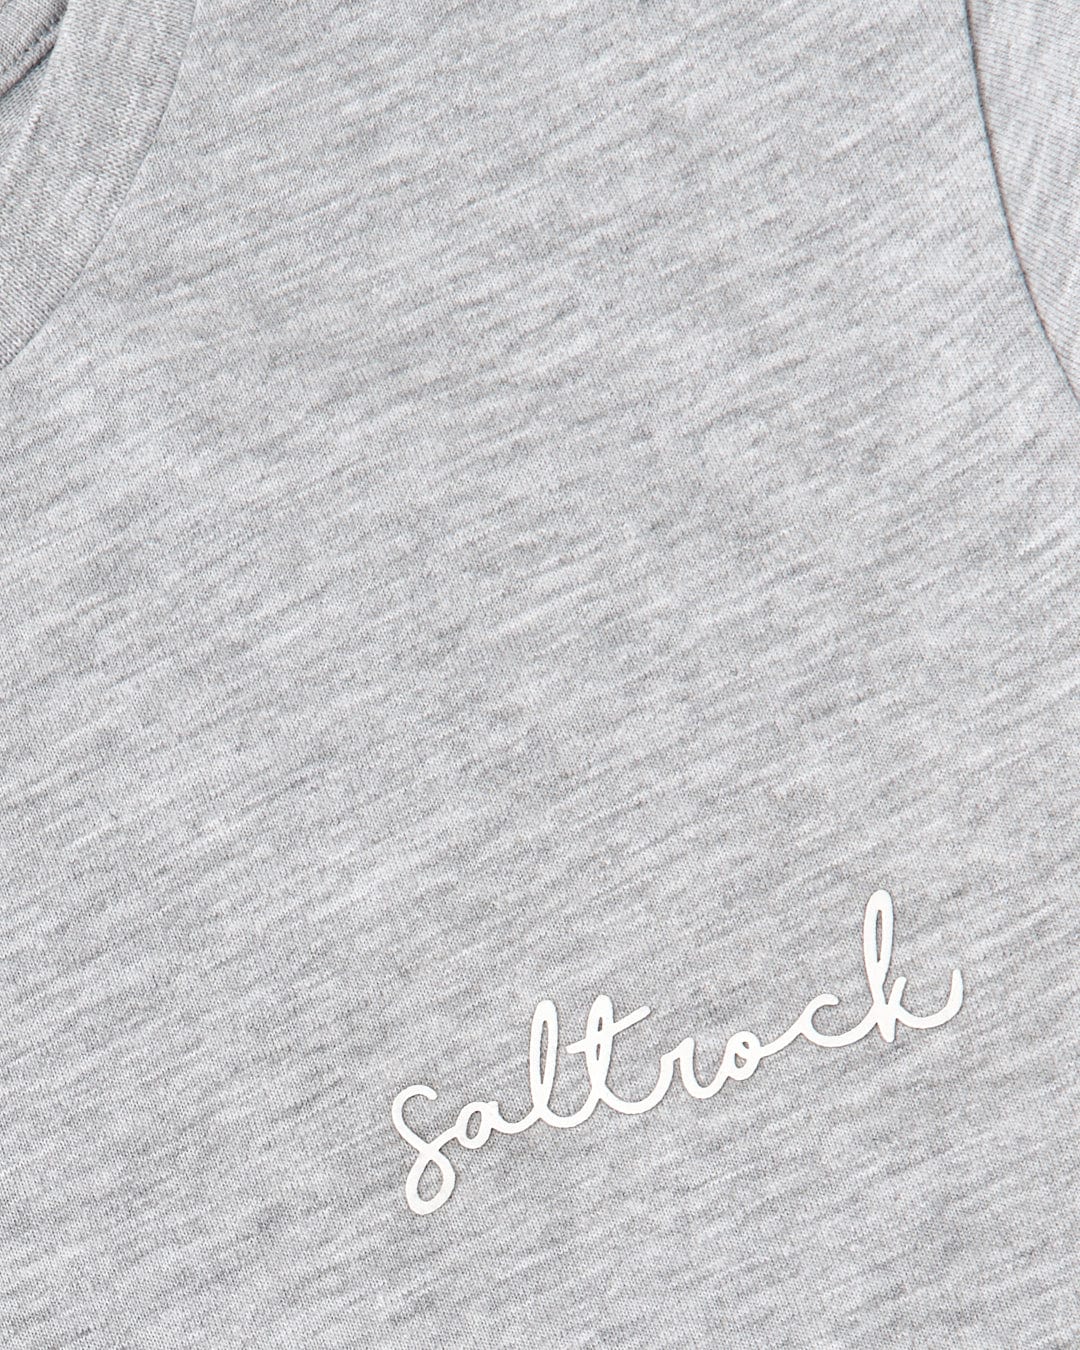 Close-up of a gray fabric texture with the word "Velator" embroidered in white cursive on the chest area by Saltrock.